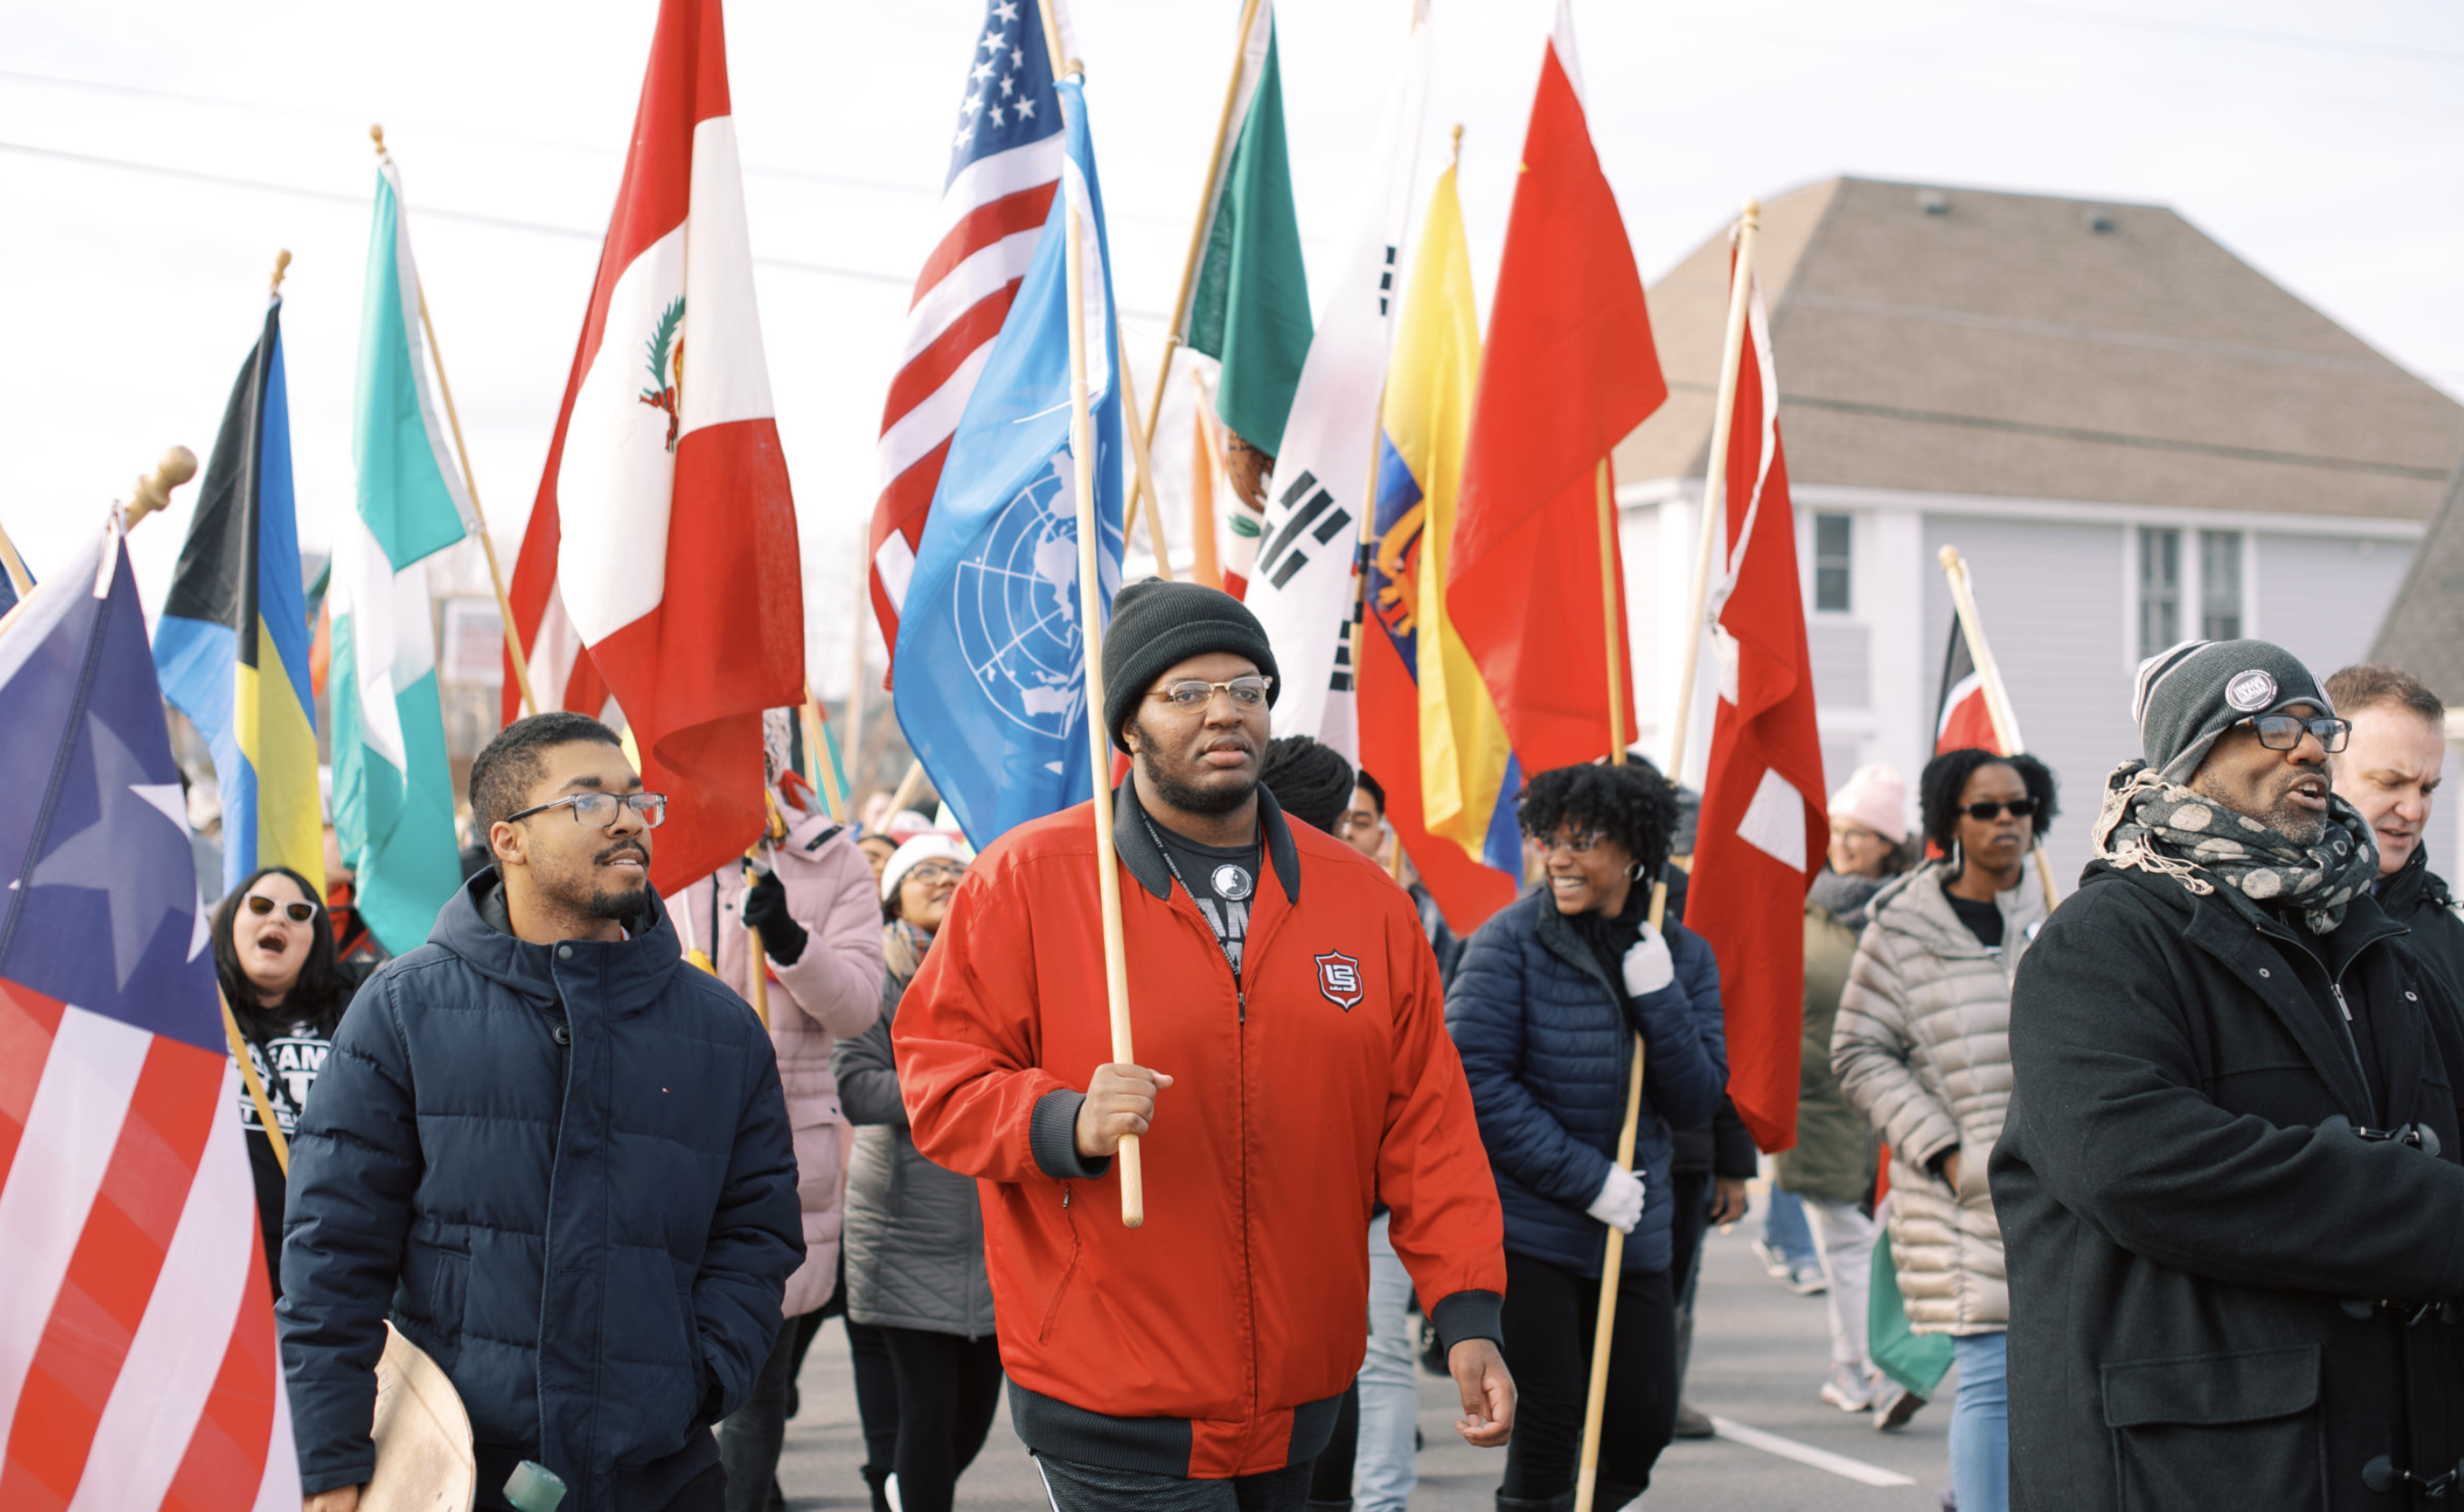 People marching with flags